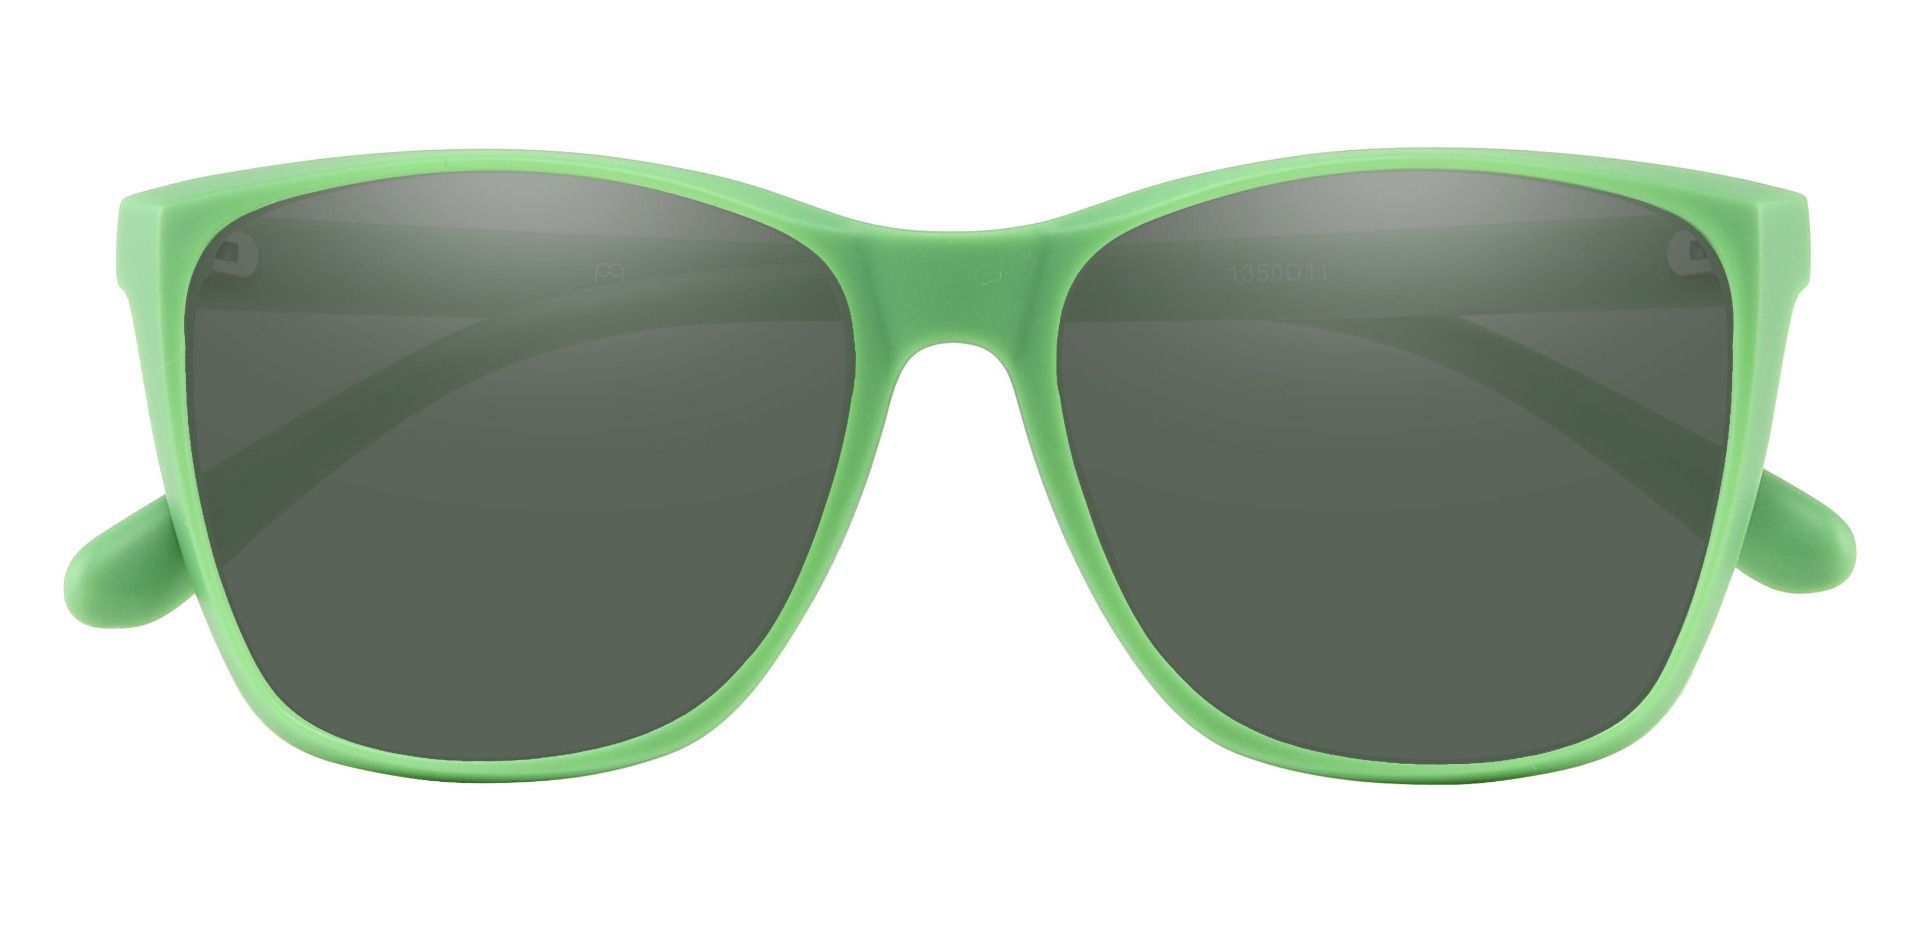 Hickory Square Reading Sunglasses - Green Frame With Green Lenses